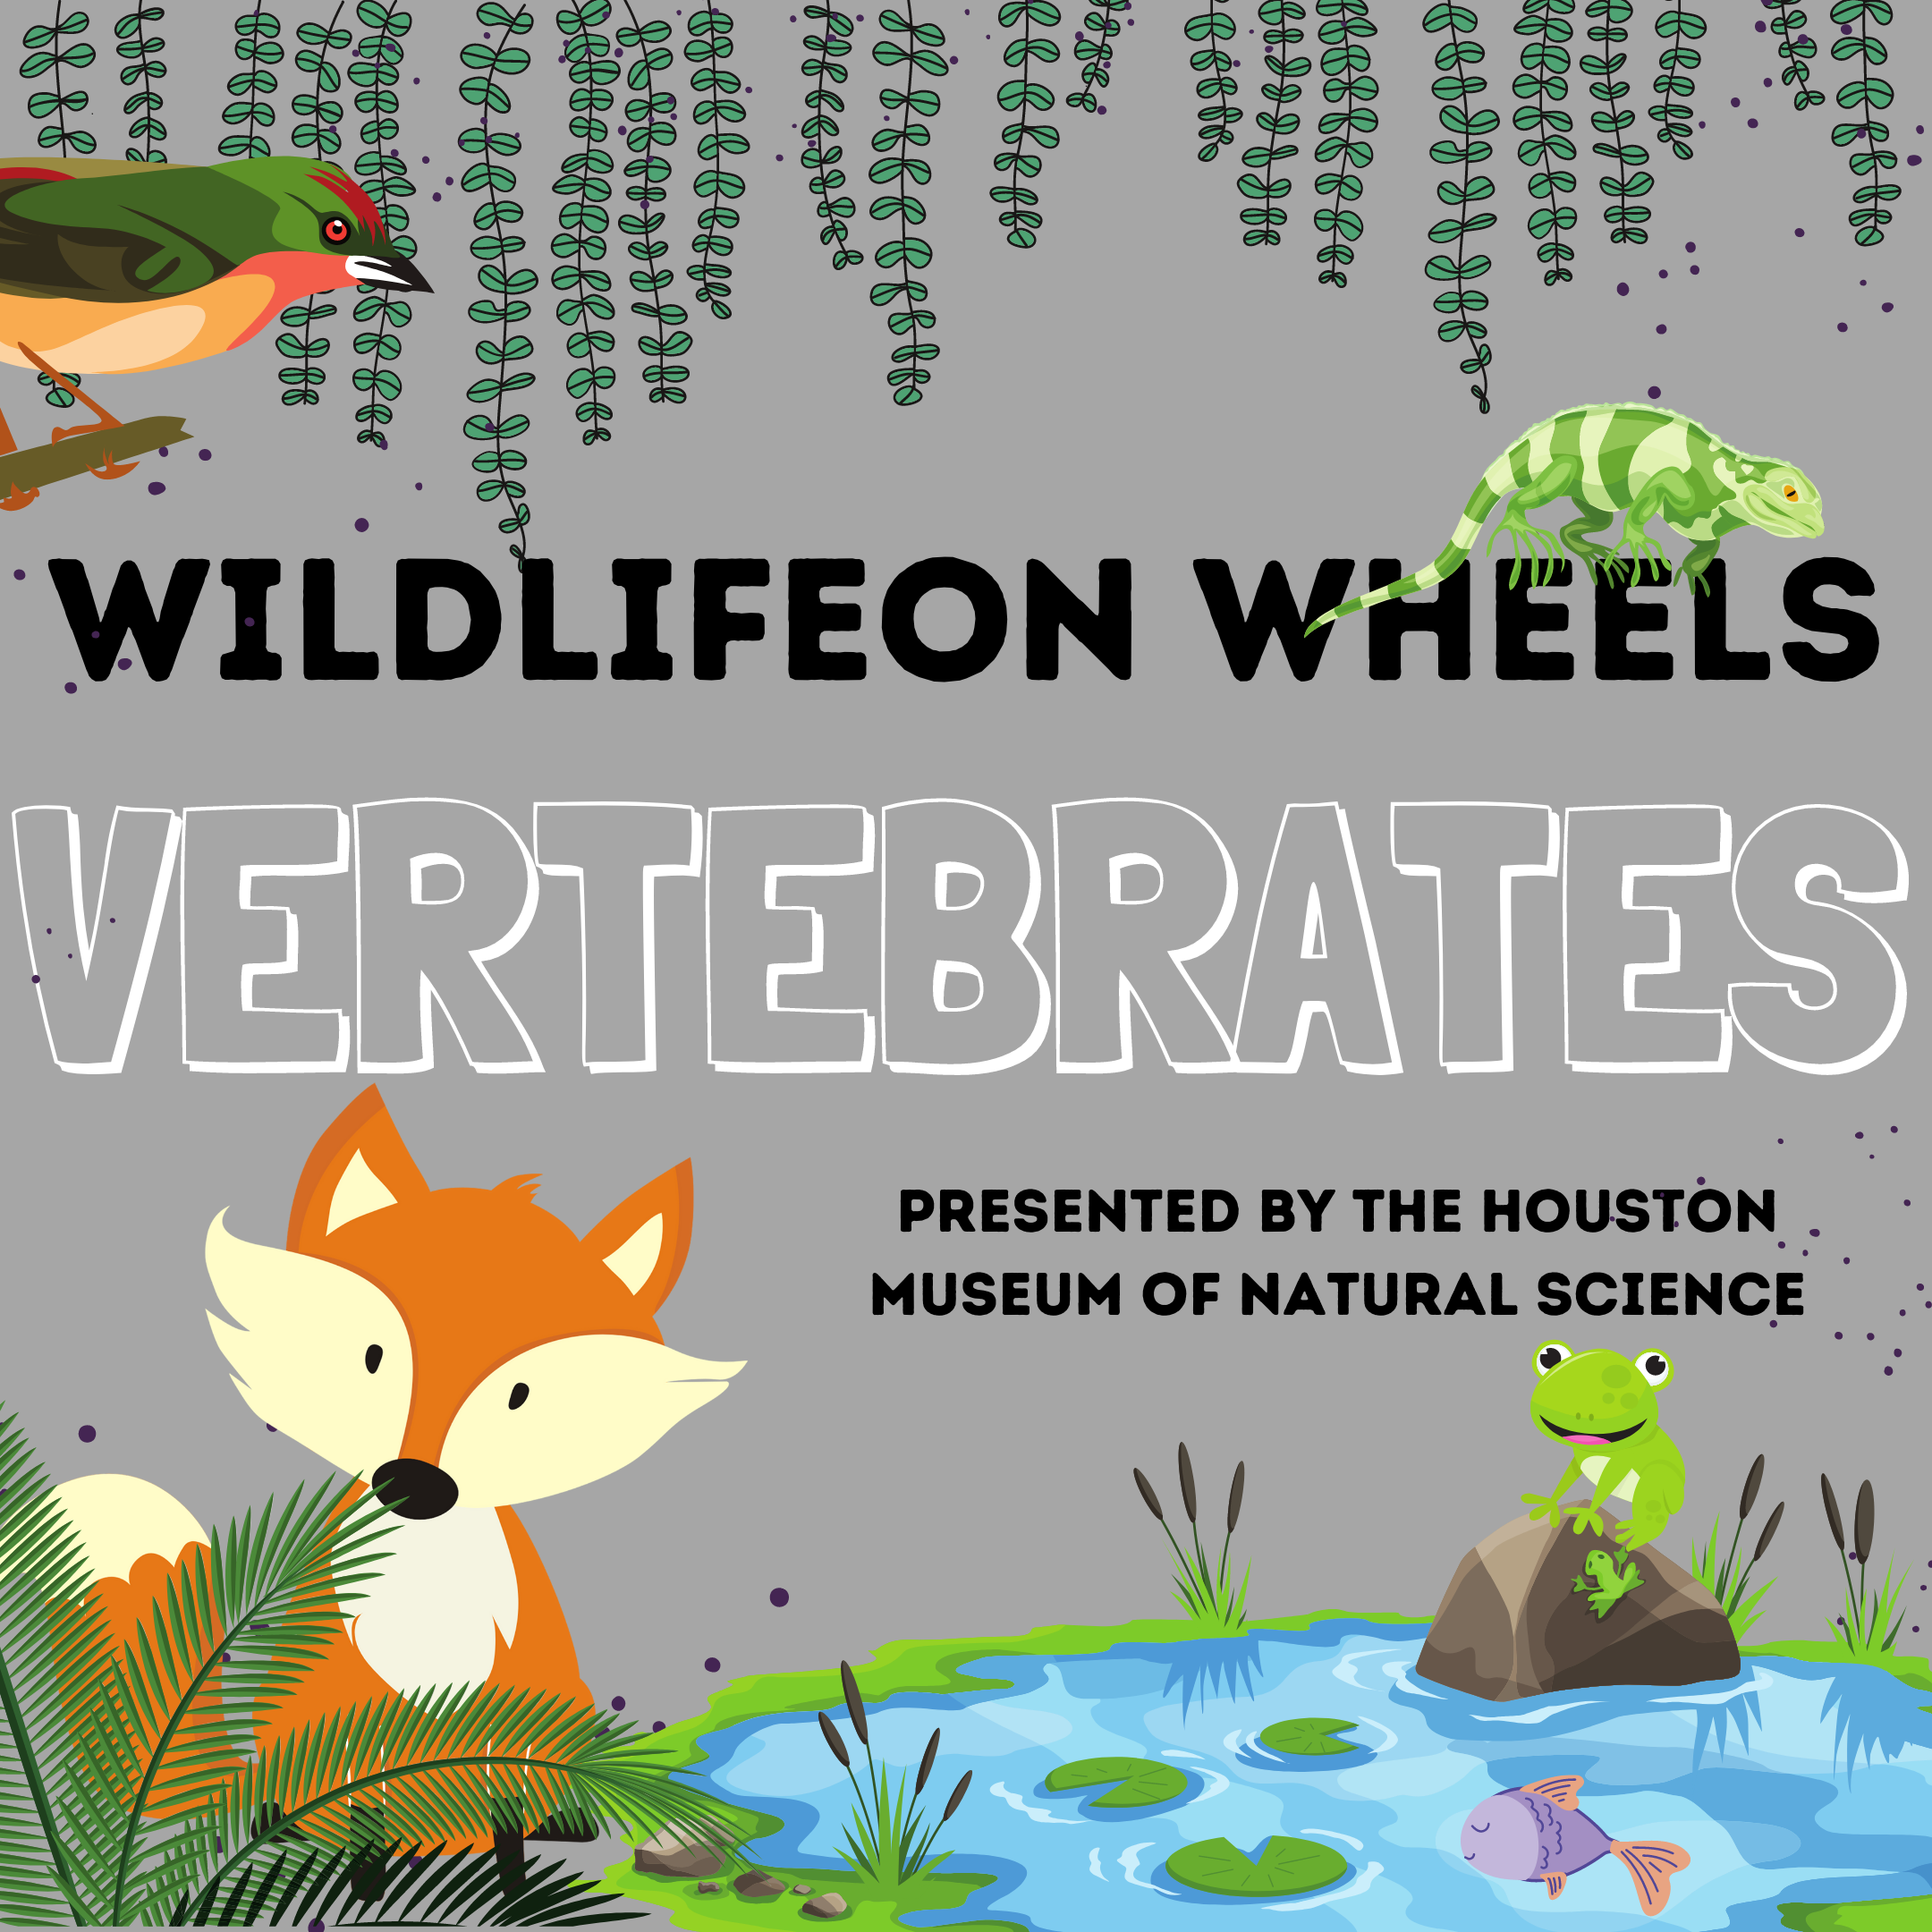 Don't miss Virtual Wildlife on Wheels: Vertebrates presented by, the Houston Museum of Natural Science!